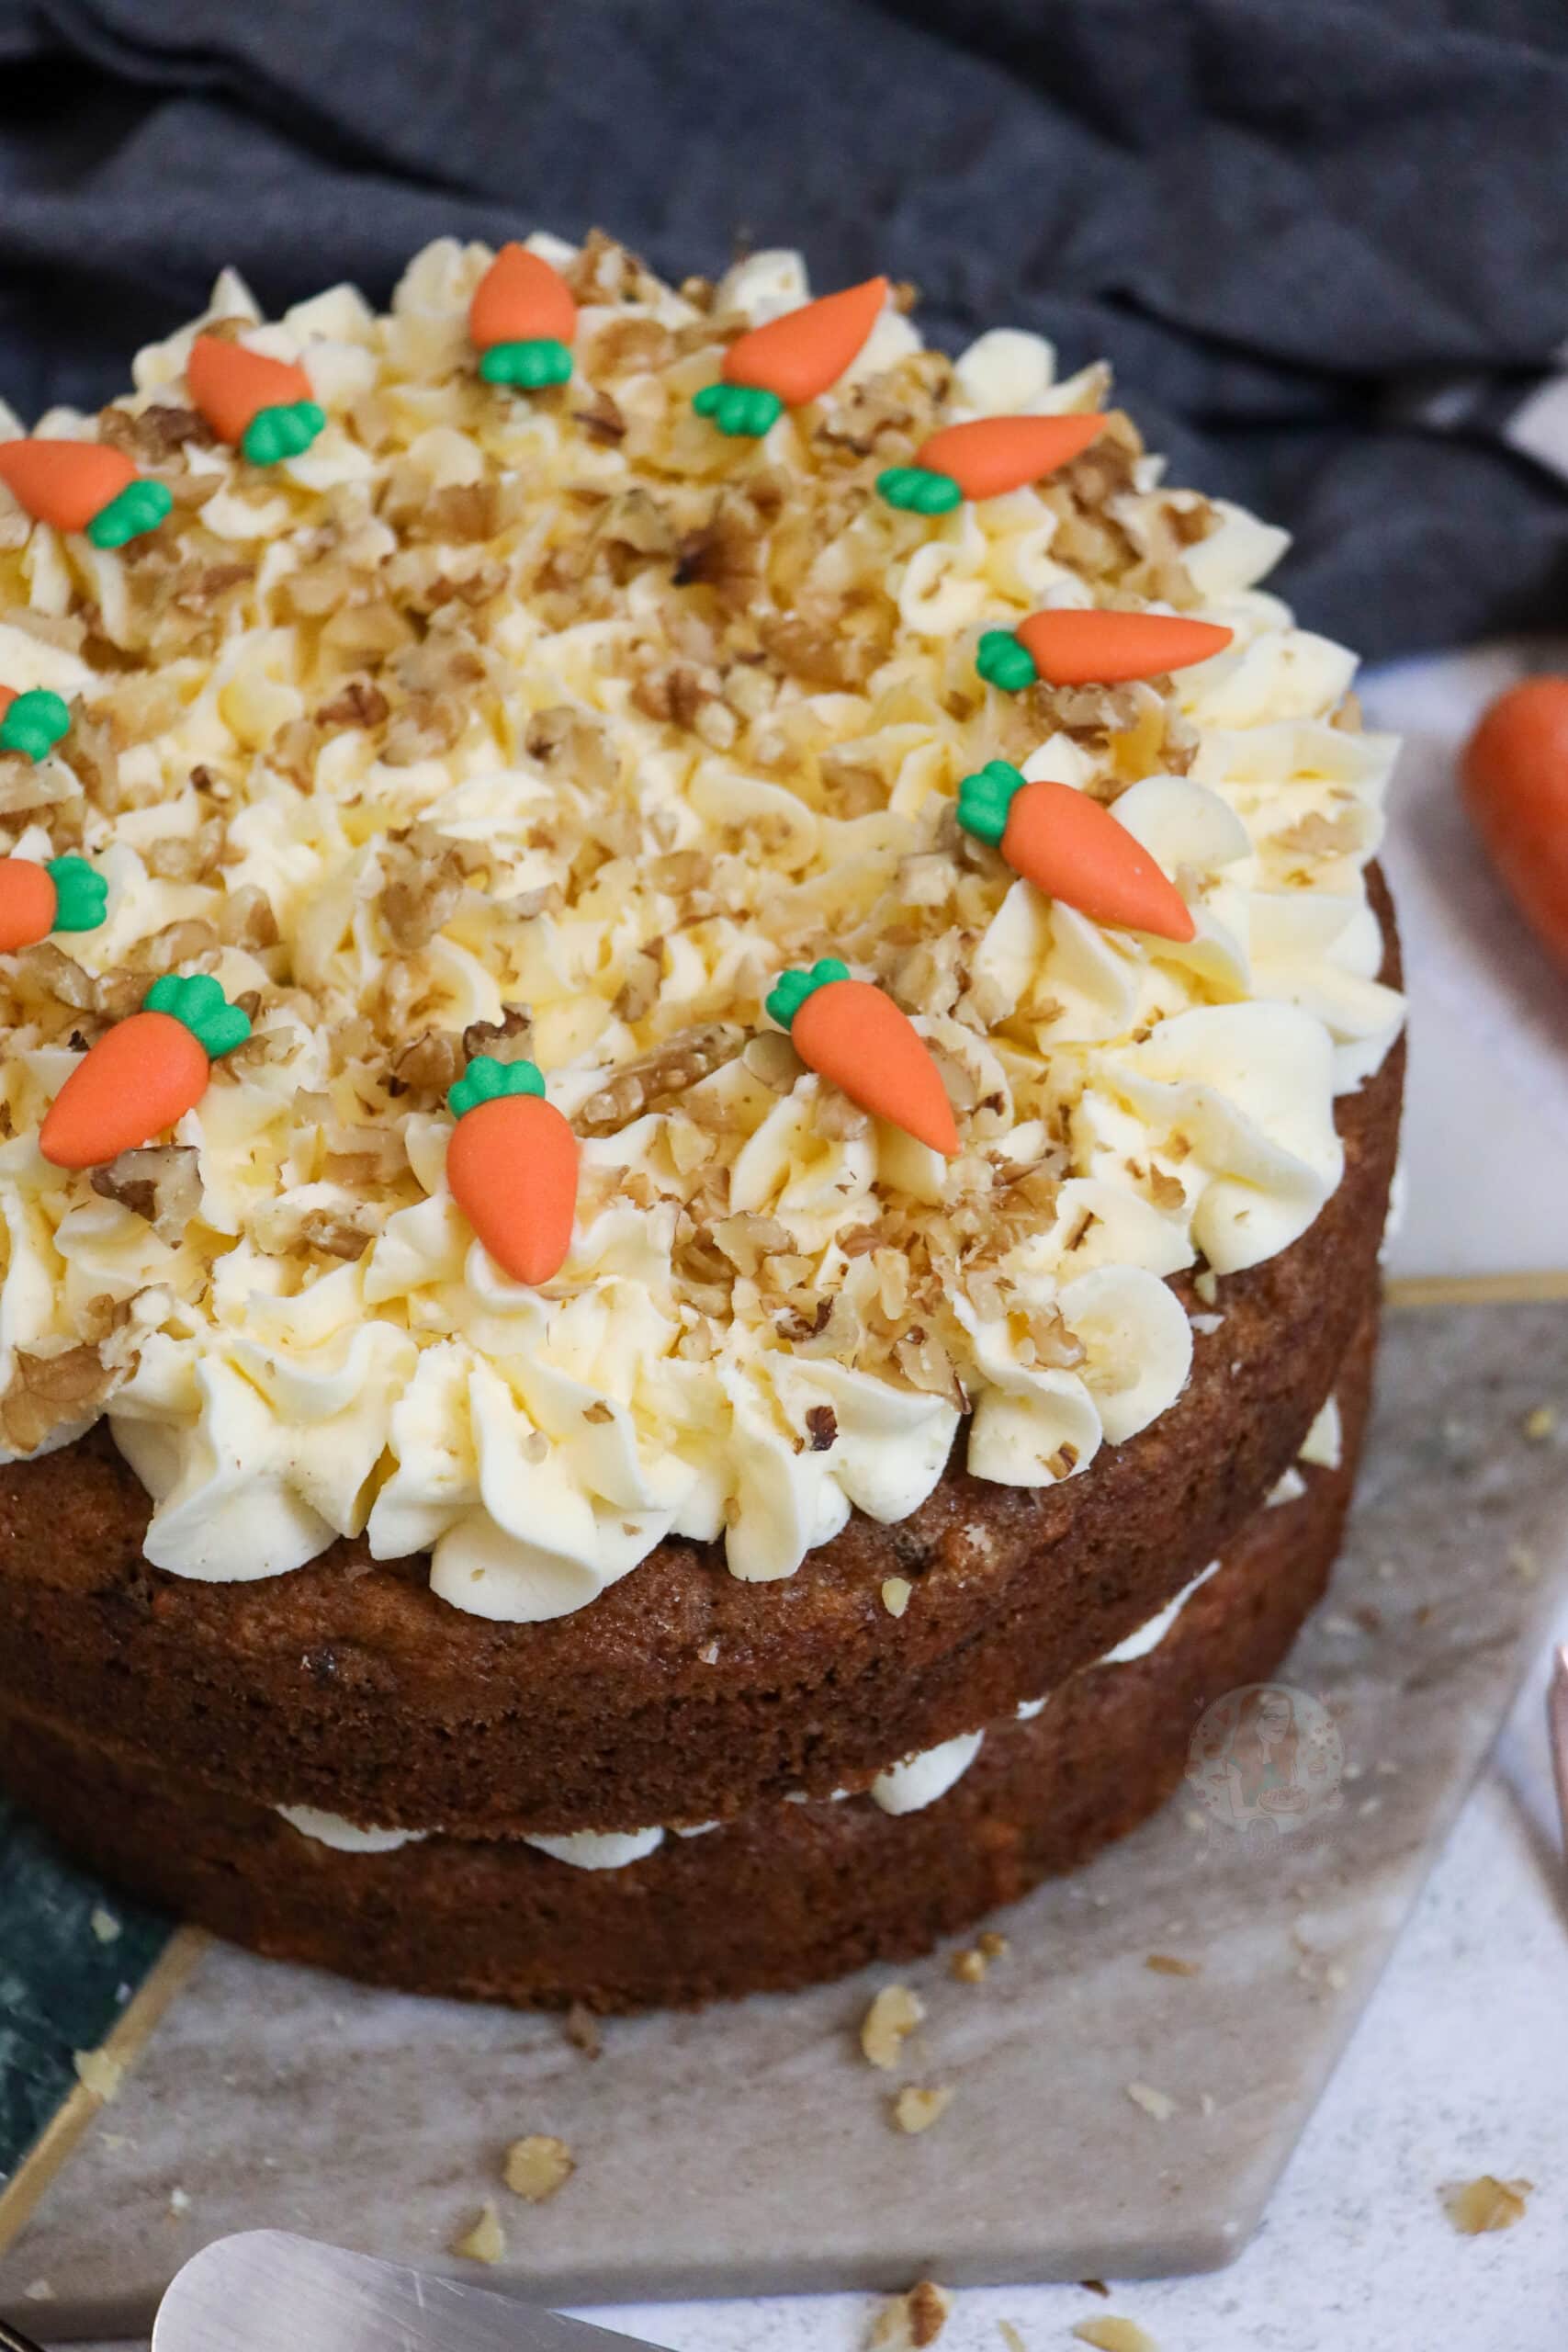 Homemade Carrot Cake | Recipes of Holly - Easy and Quick Recipes